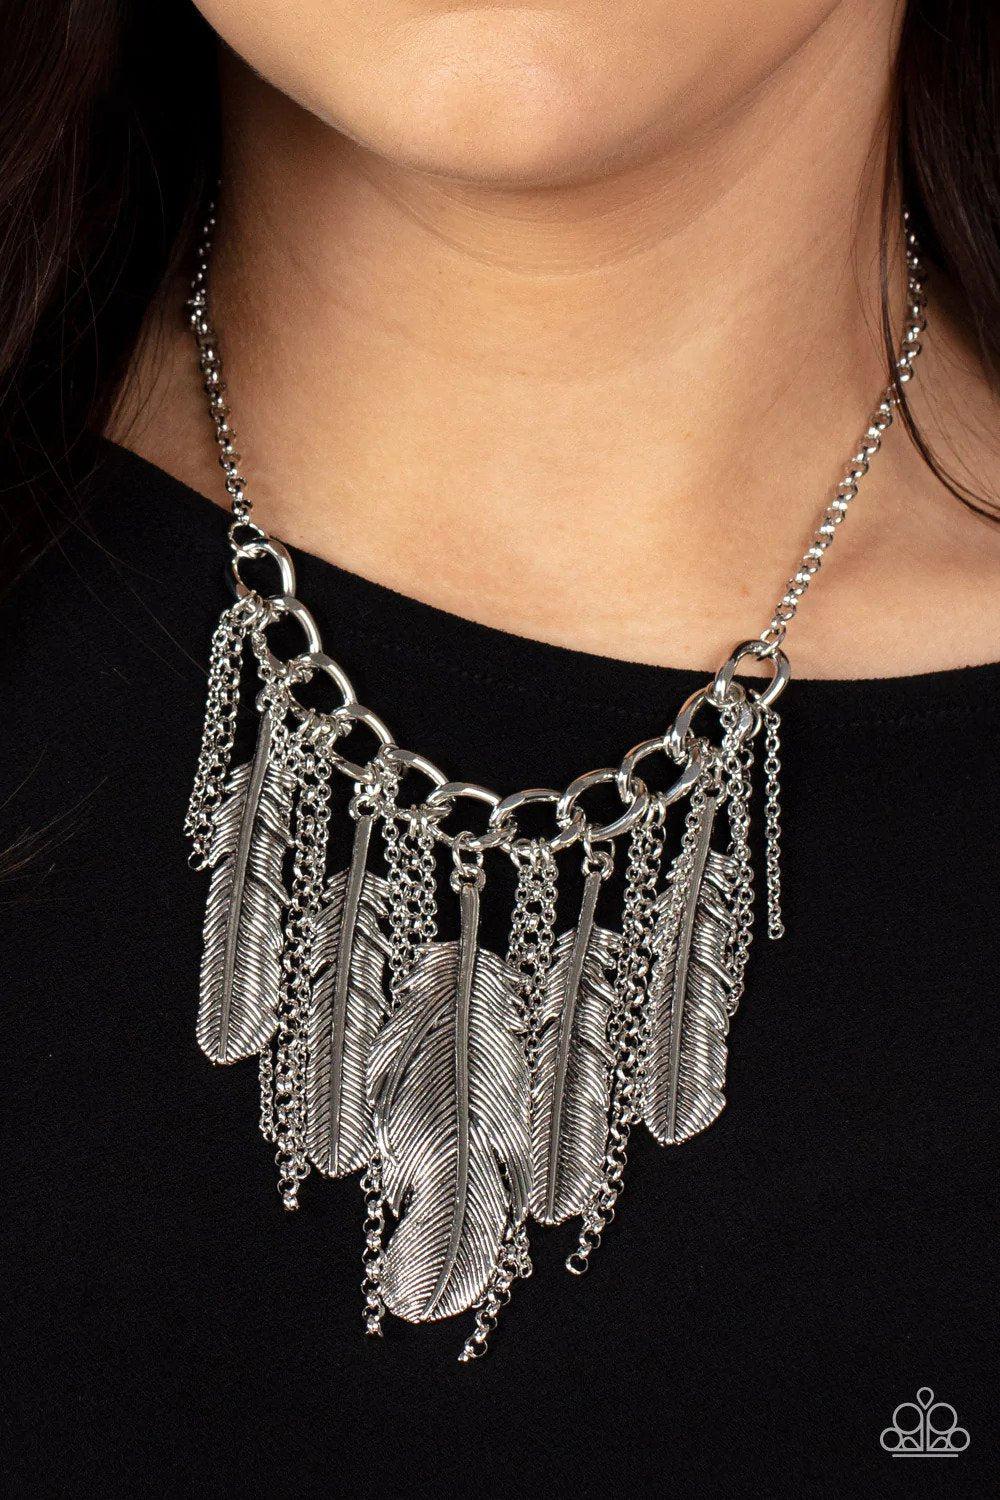 NEST Friends Forever Silver Feather Necklace - Paparazzi Accessories- lightbox - CarasShop.com - $5 Jewelry by Cara Jewels